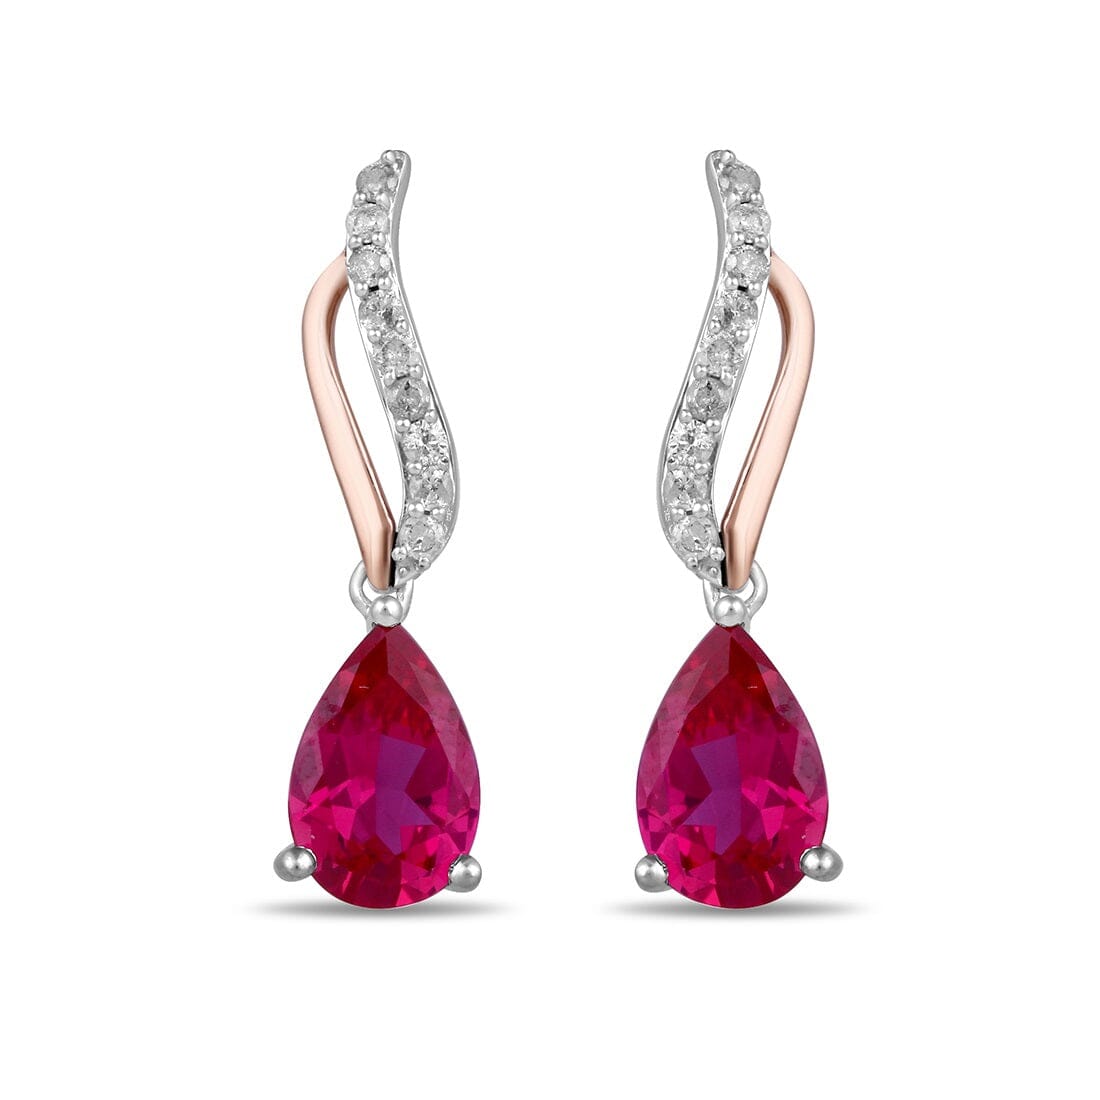 Pear Shaped Created Ruby Stud Earrings with 0.15ct of Diamonds in Sterling Silver and 9ct Rose Gold Earrings Bevilles 